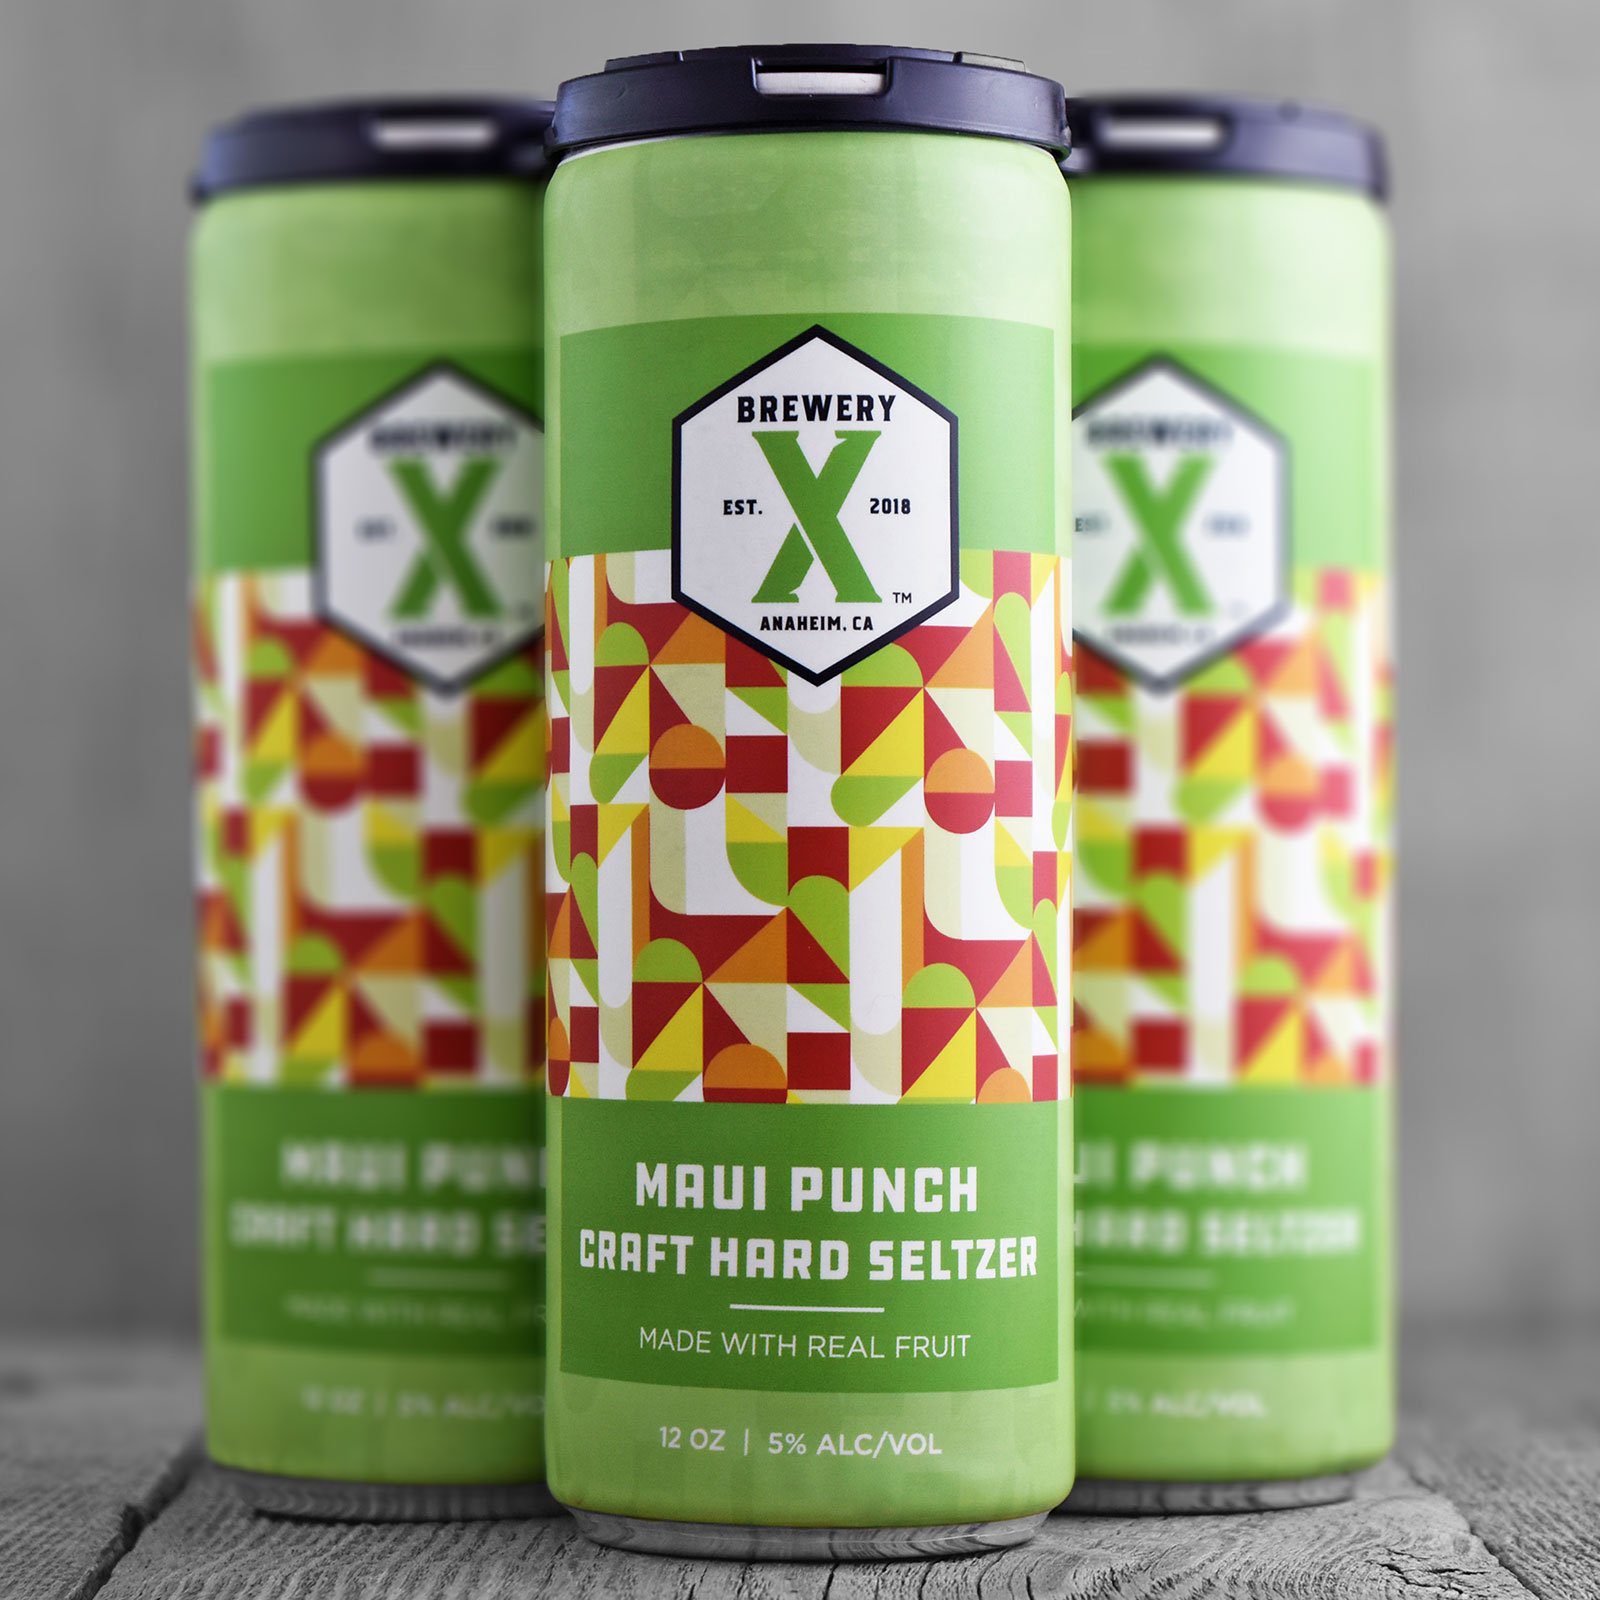 Maui Punch Hard Seltzer by Brewery X Found at El Toro Gourmet Meats in Lake Forest, CA